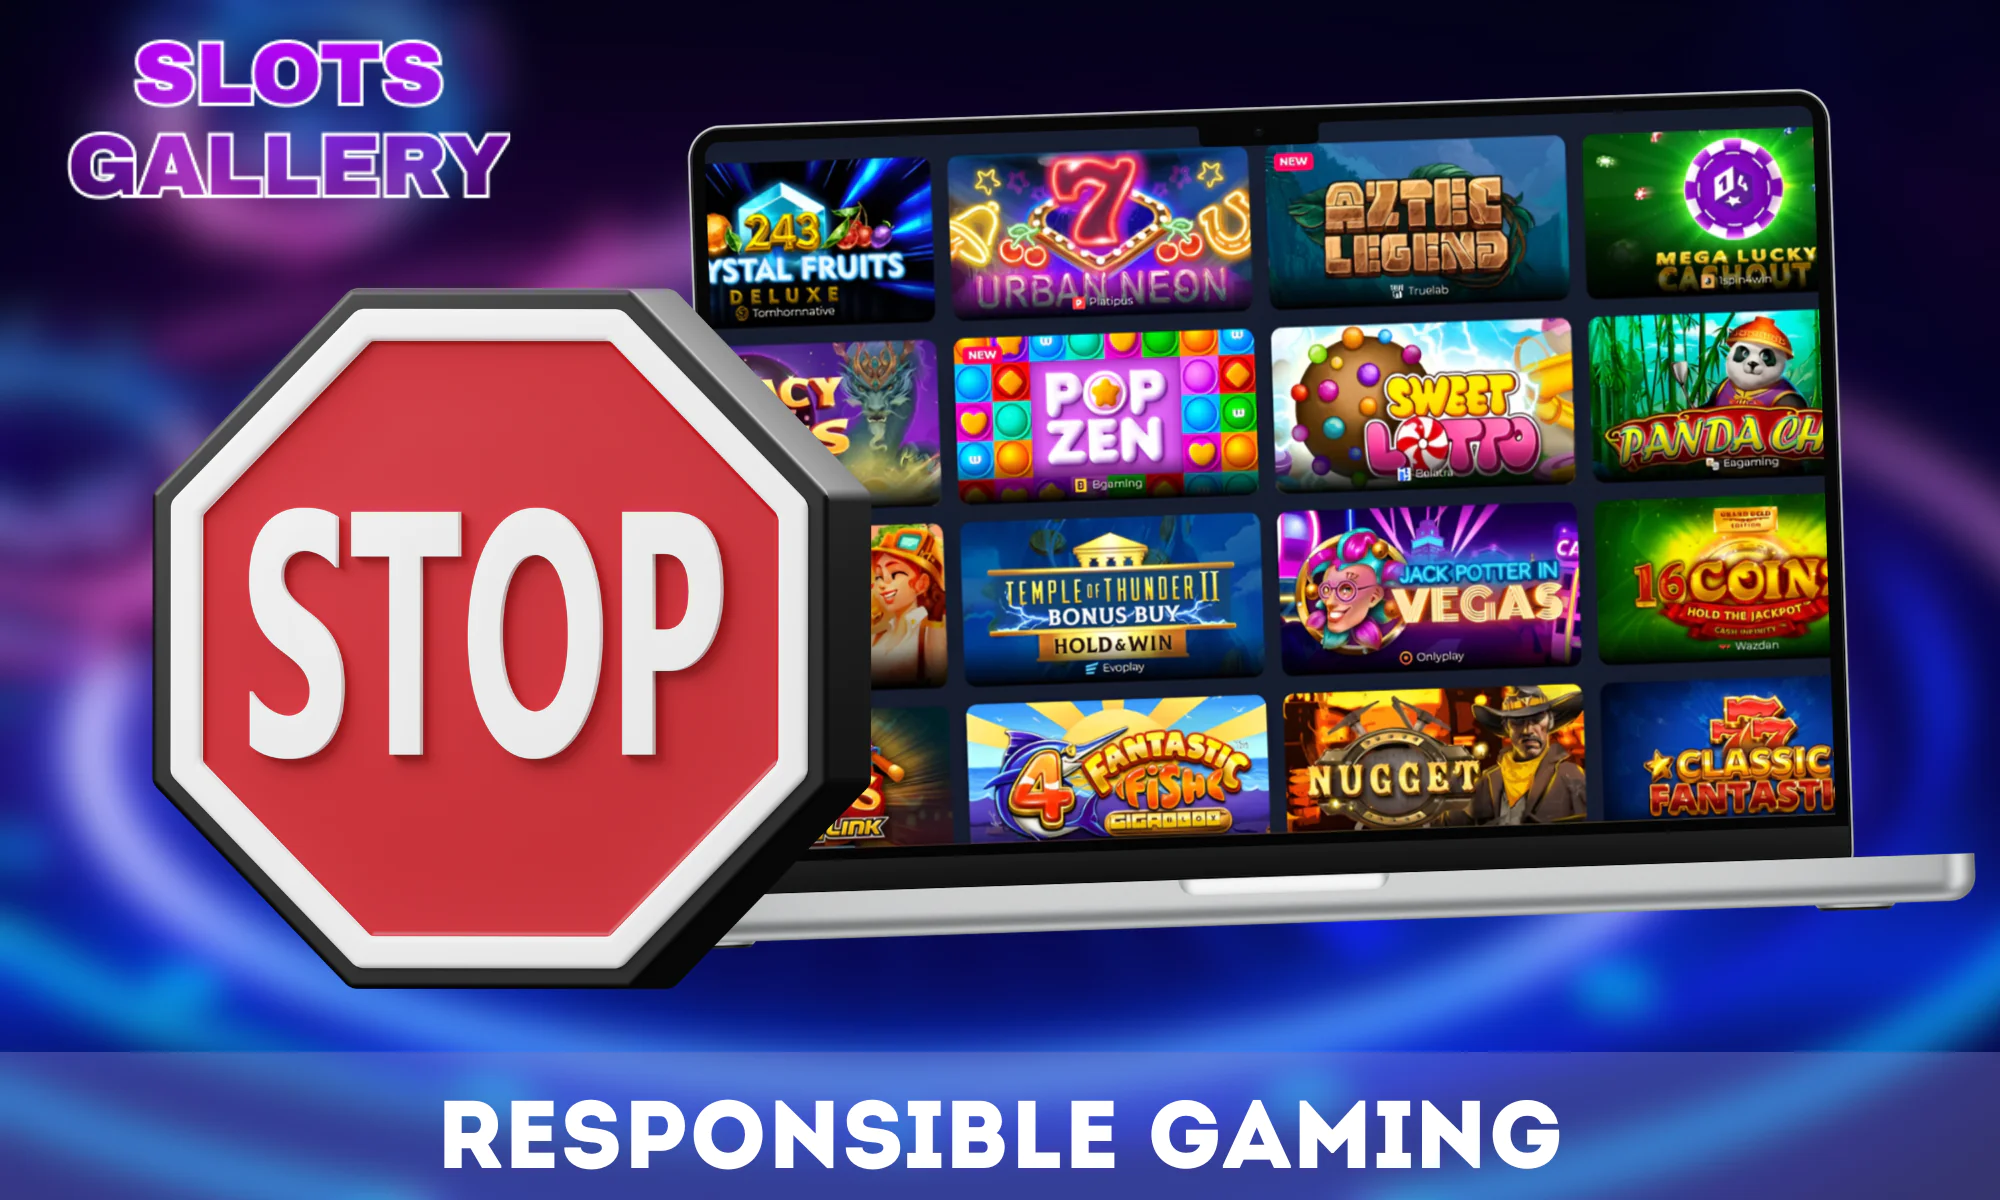 Slots gallery adheres to the responsible gambling policy and helps players with this